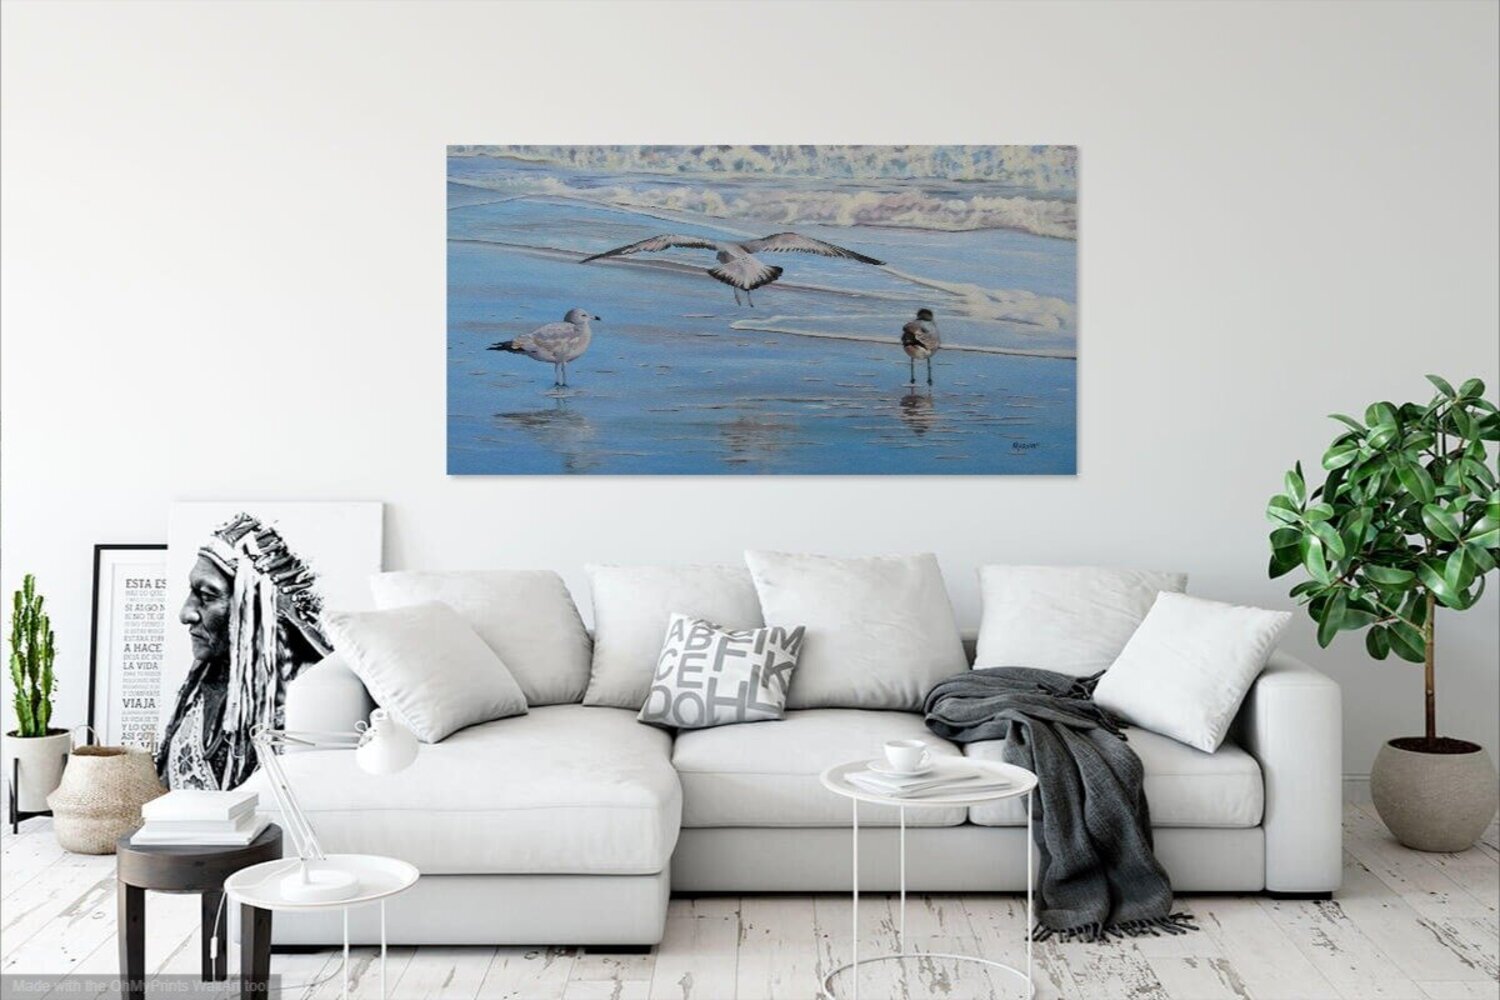 Seagulls On Myrtle Beach XI by Janette Marvin (2021) : Painting Oil on ...